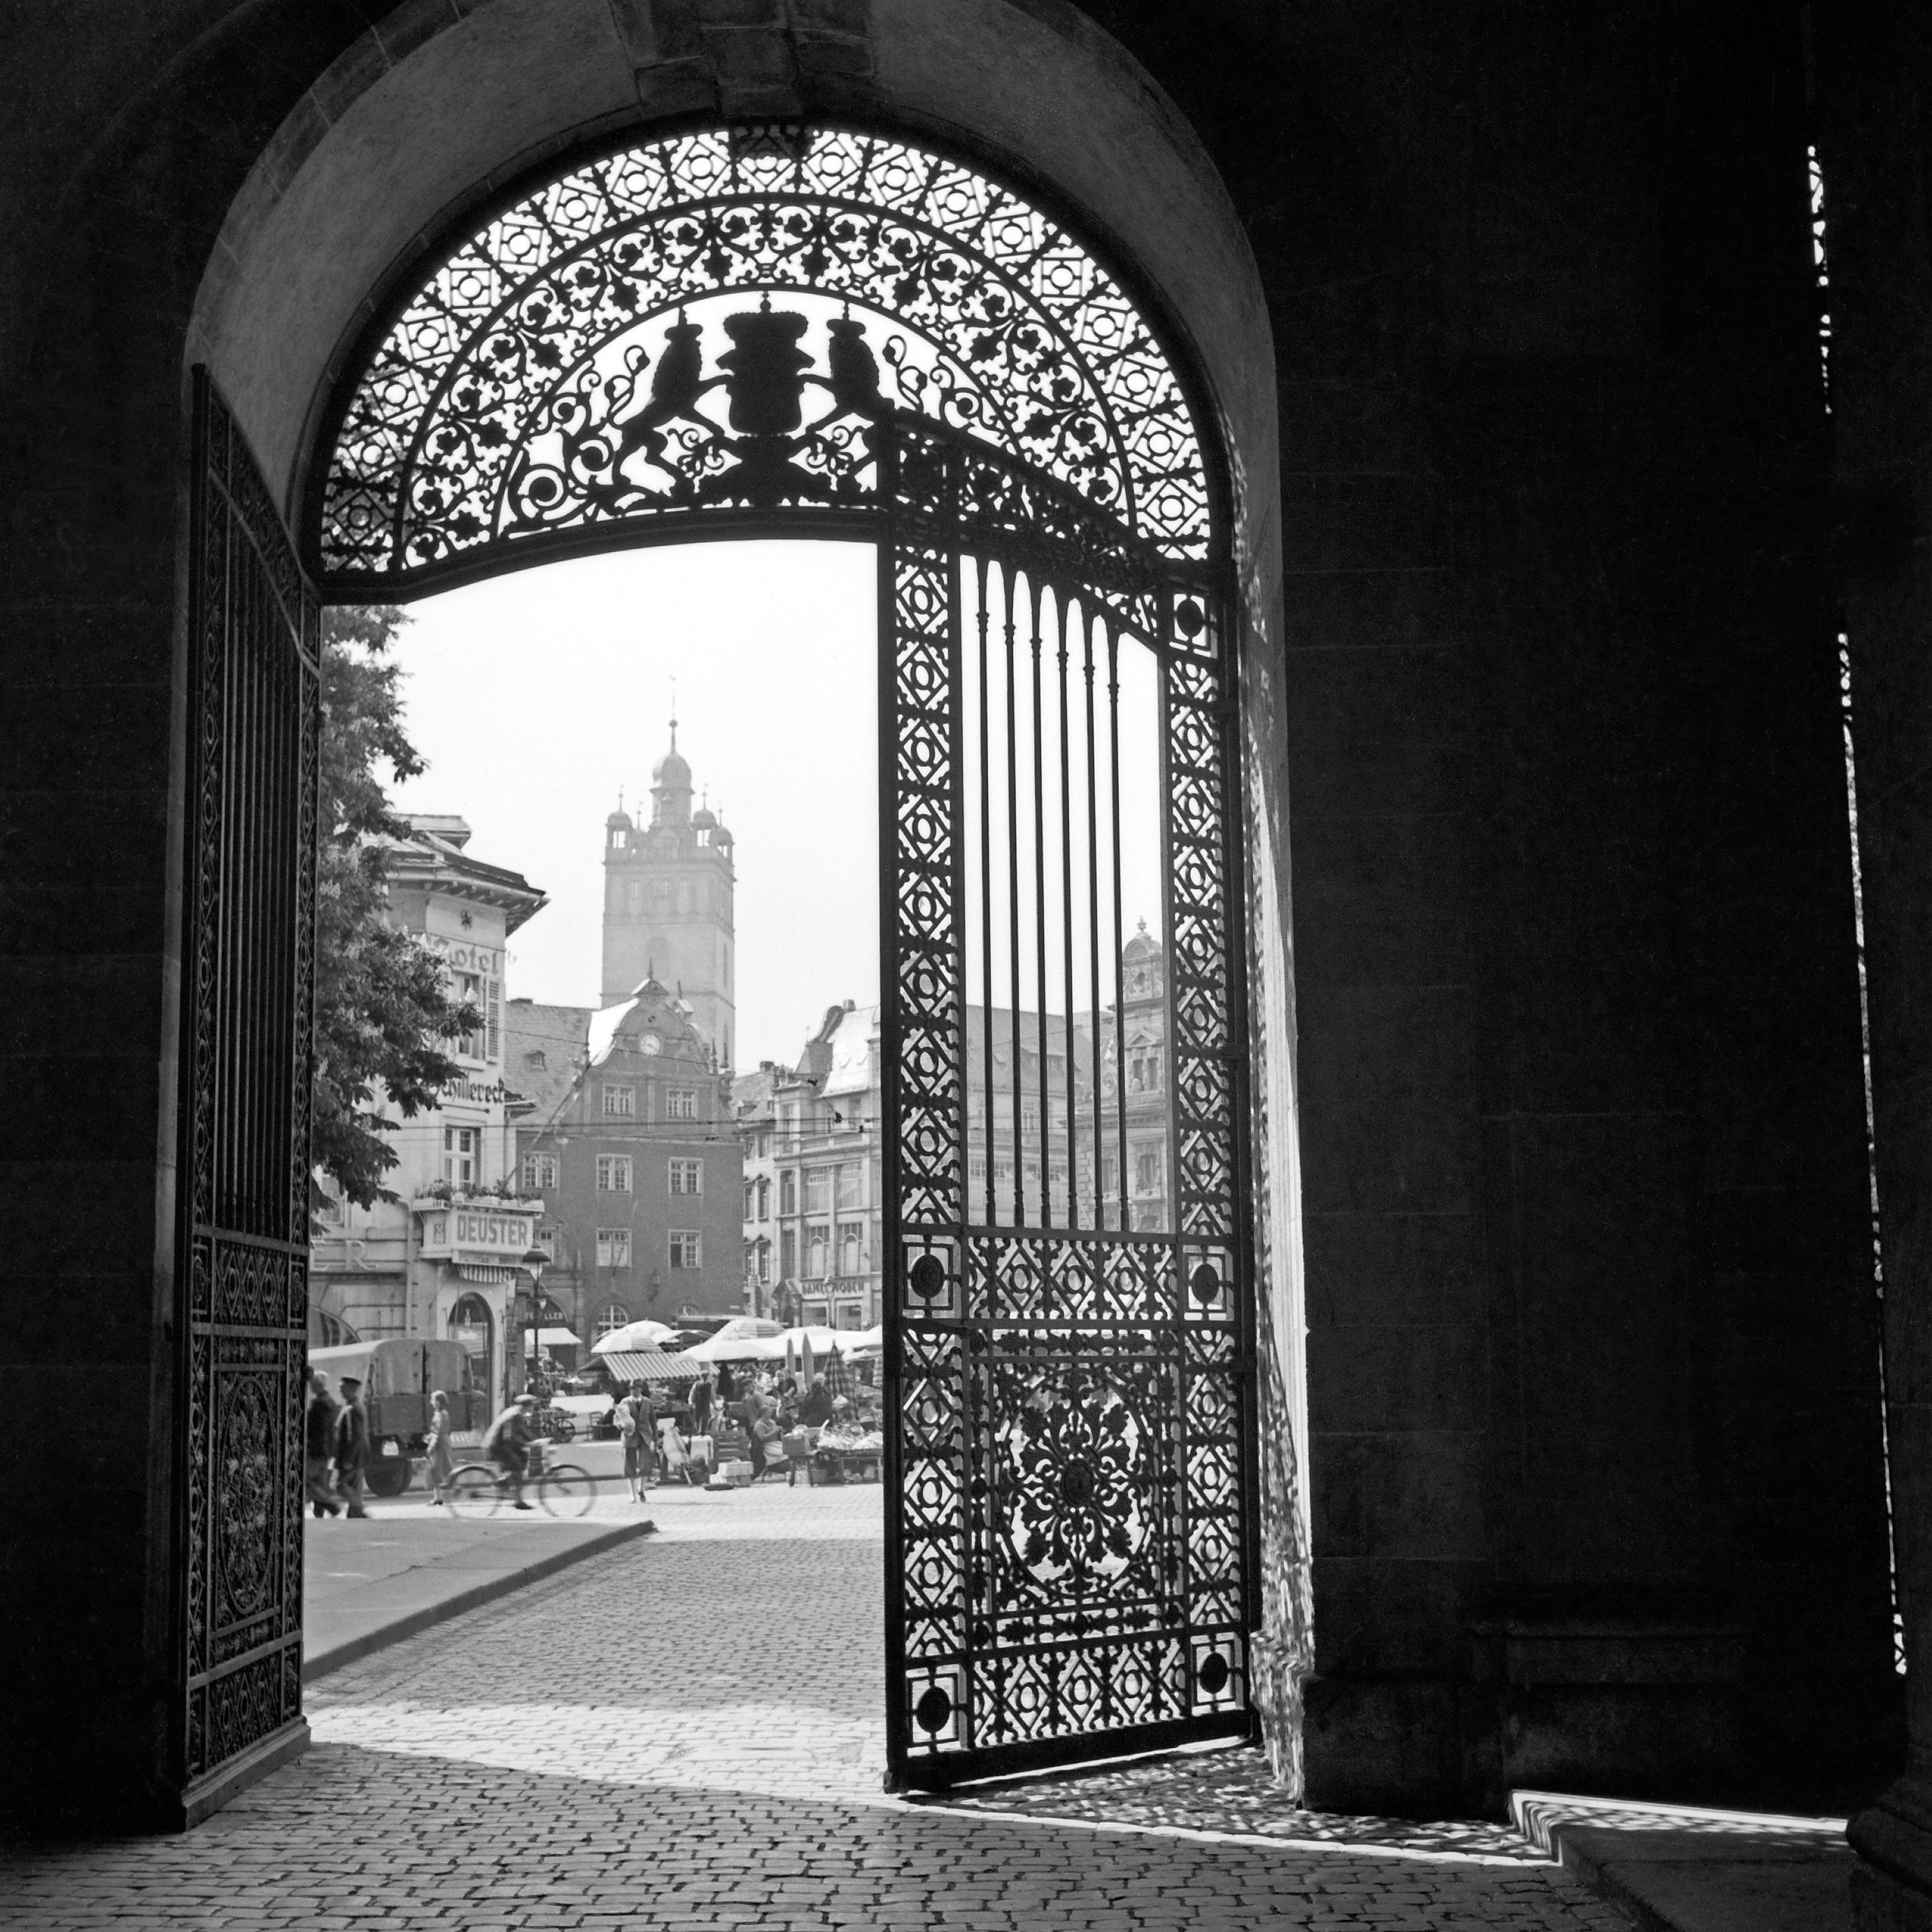 Karl Heinrich Lämmel Black and White Photograph - View gate Residence castle to main market Darmstadt, Germany 1938 Printed Later 